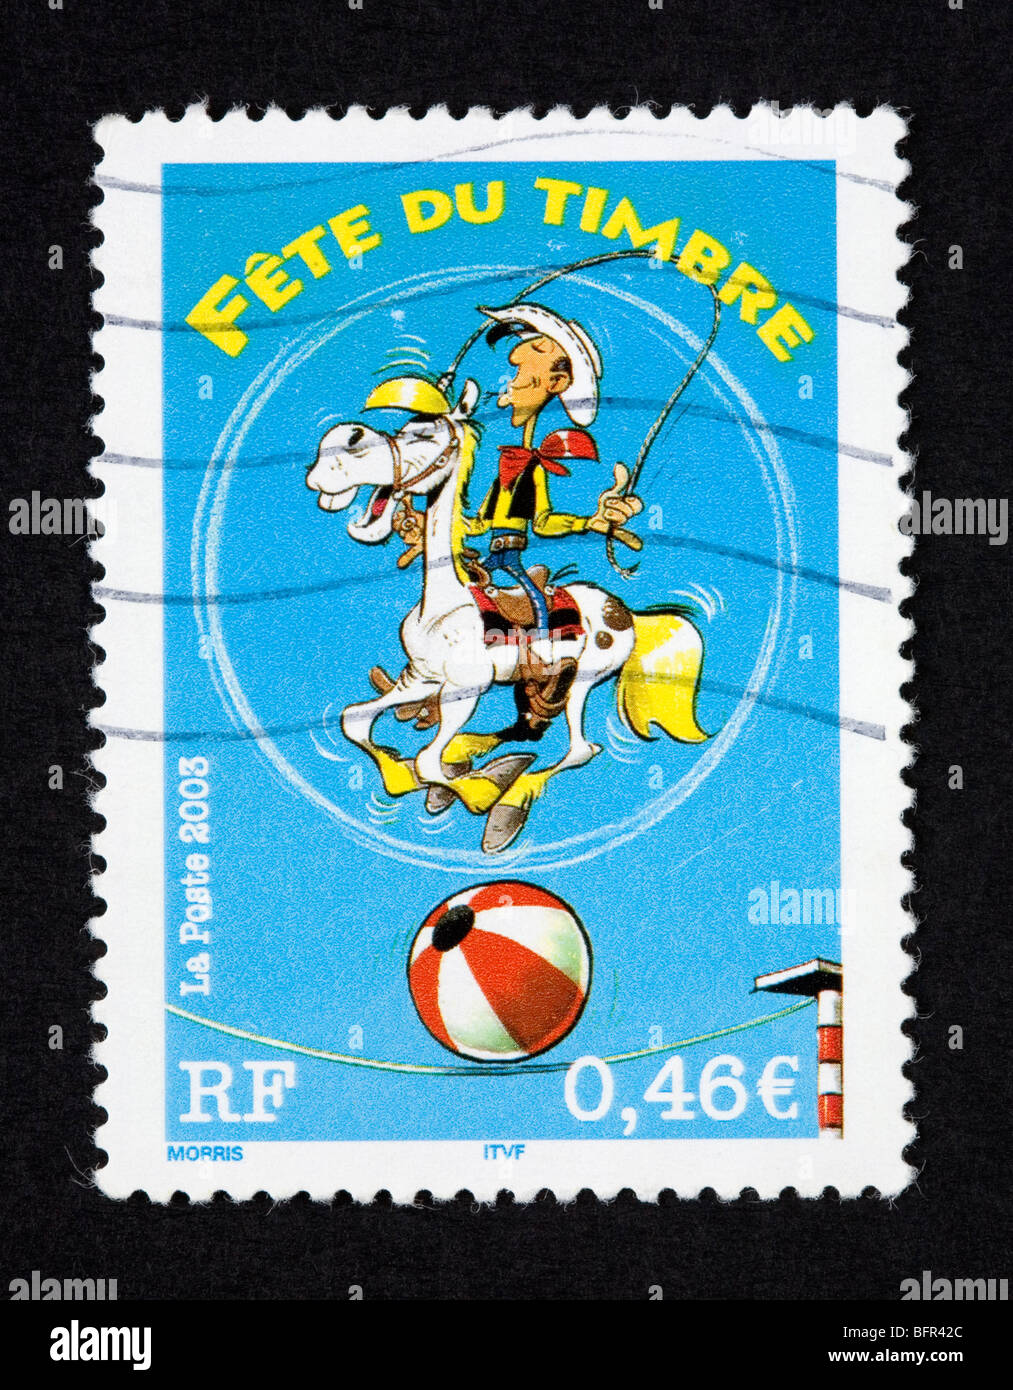 French postage stamp Stock Photo